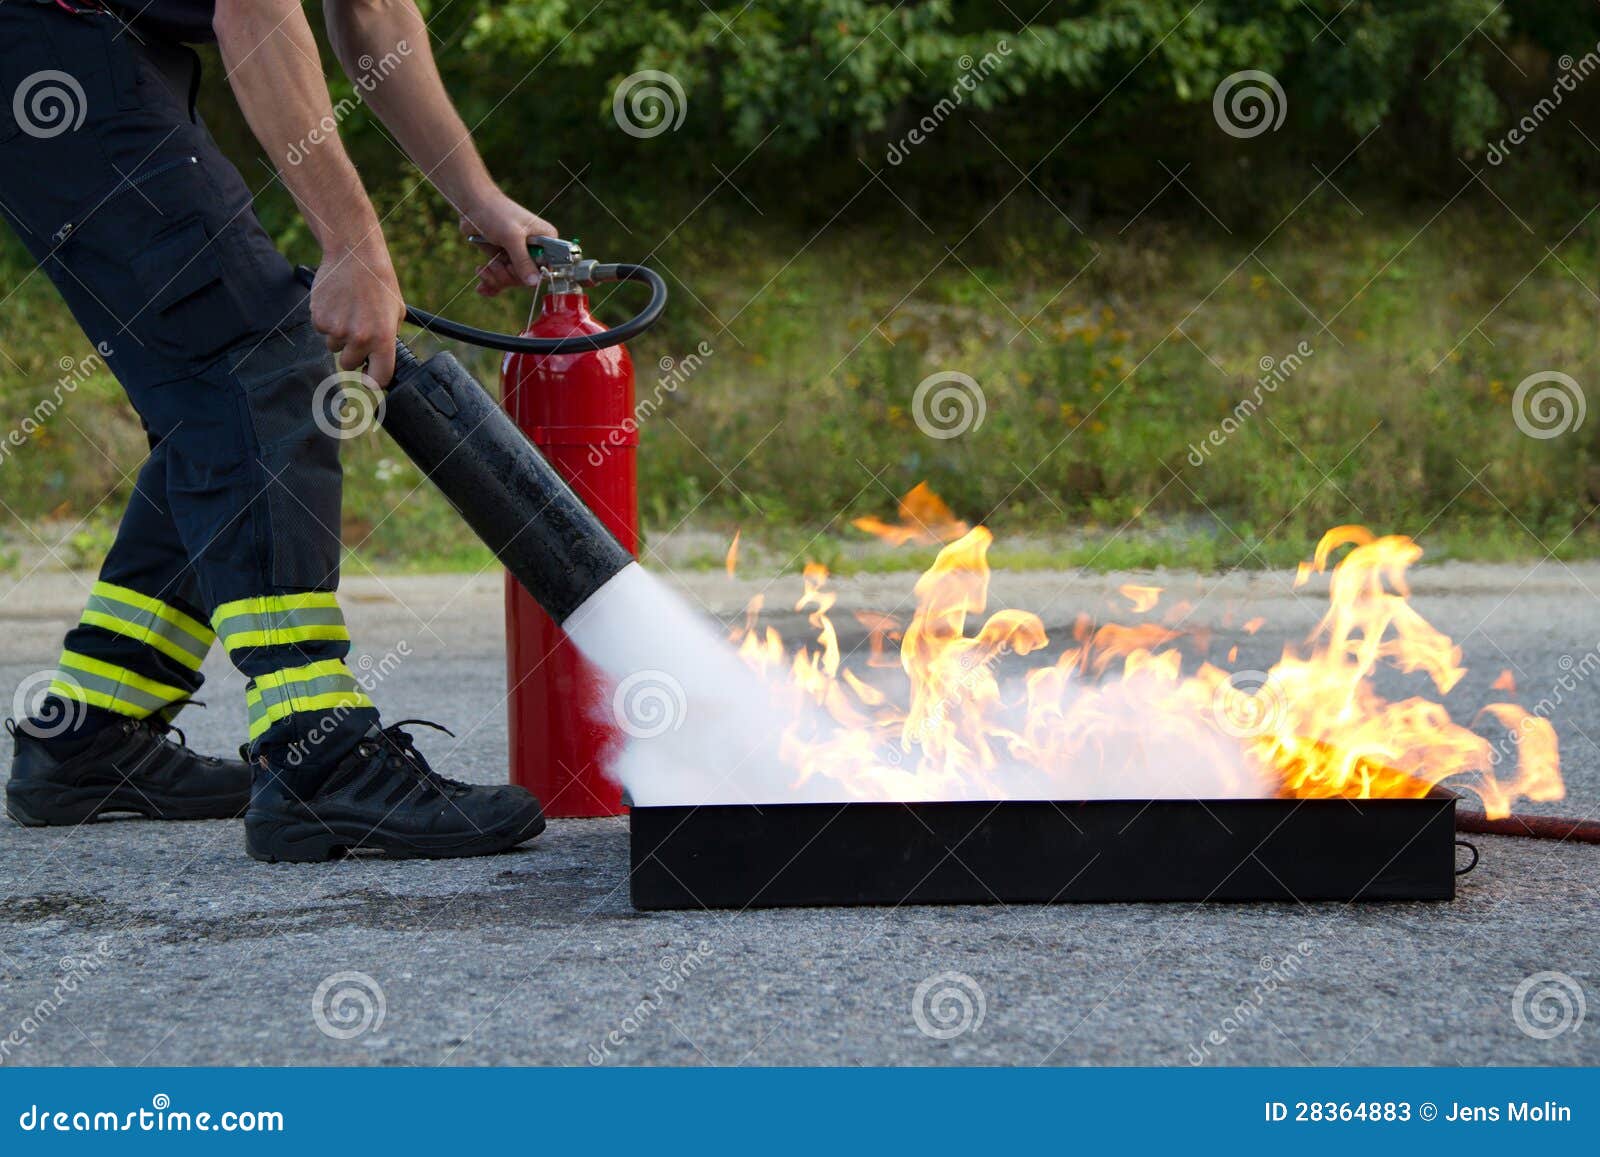 instructor showing fire extinguisher